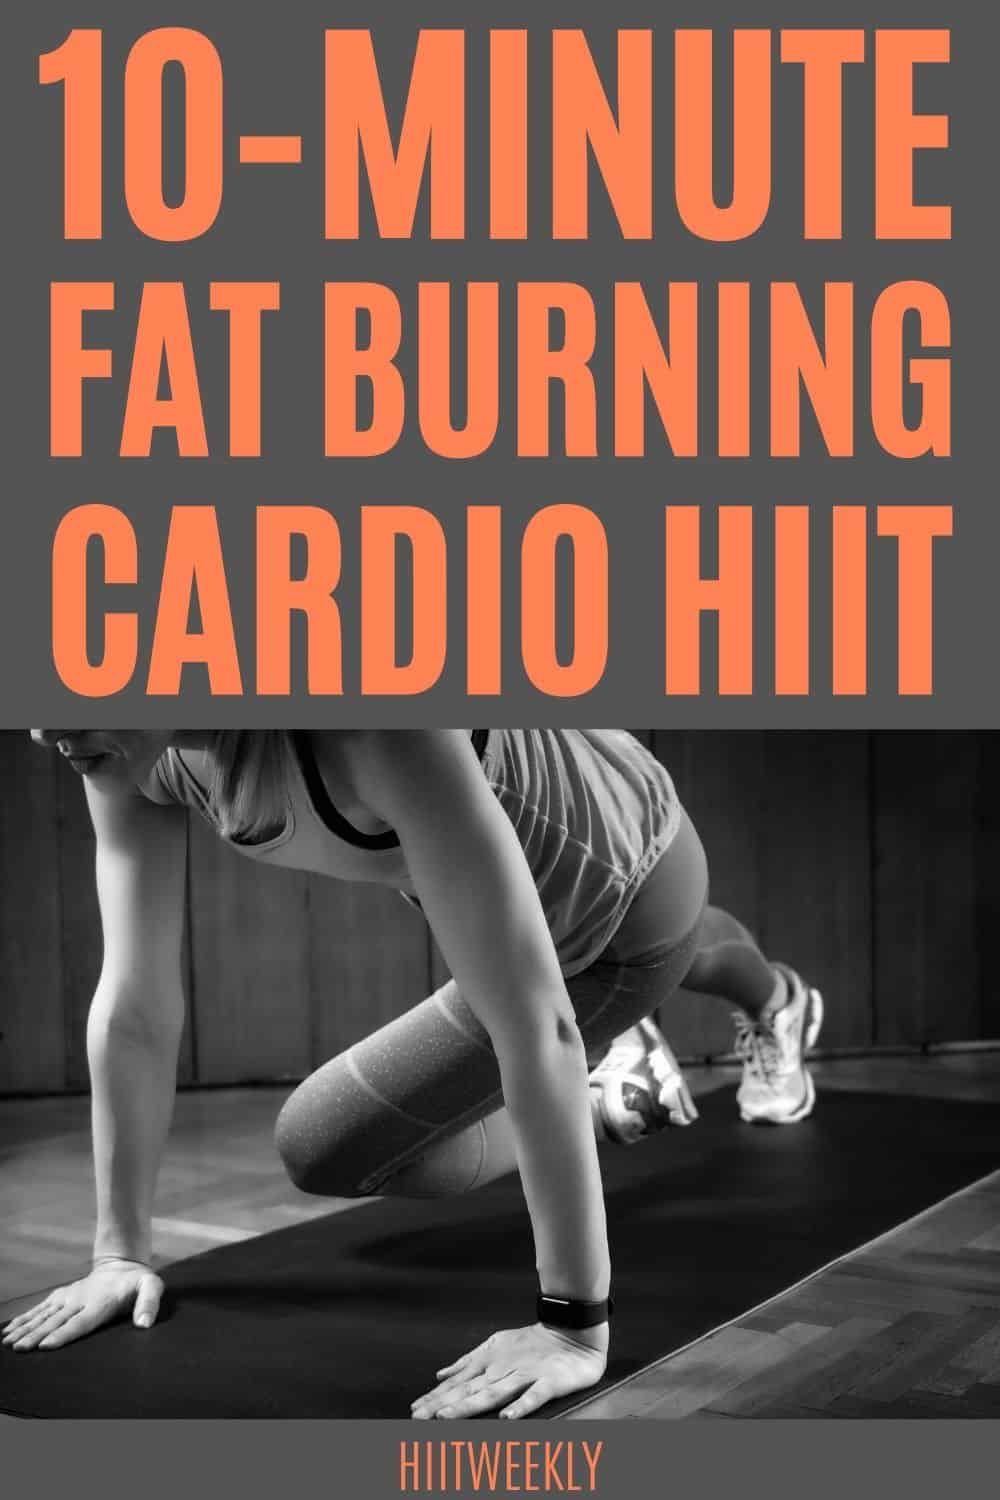 Quick 10 Minute Hiit Workout Without Equipment To Burn Belly Fat Hiit Weekly